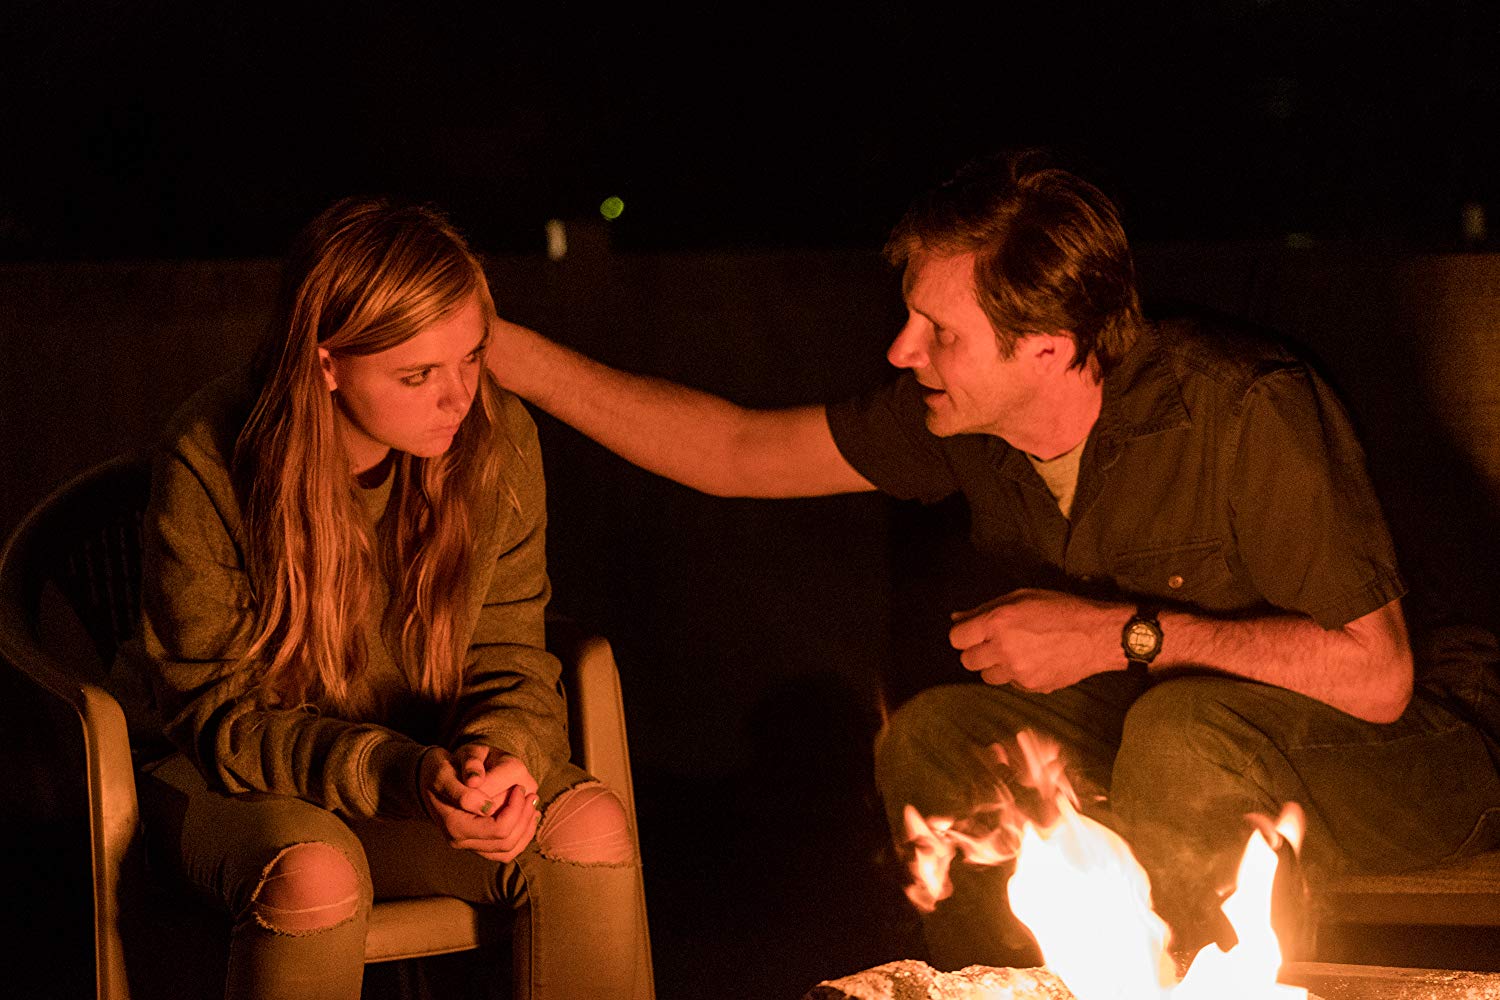 In a still from Eighth Grade, Elsie's father tries to comfort her as they sit in front of a campfire.